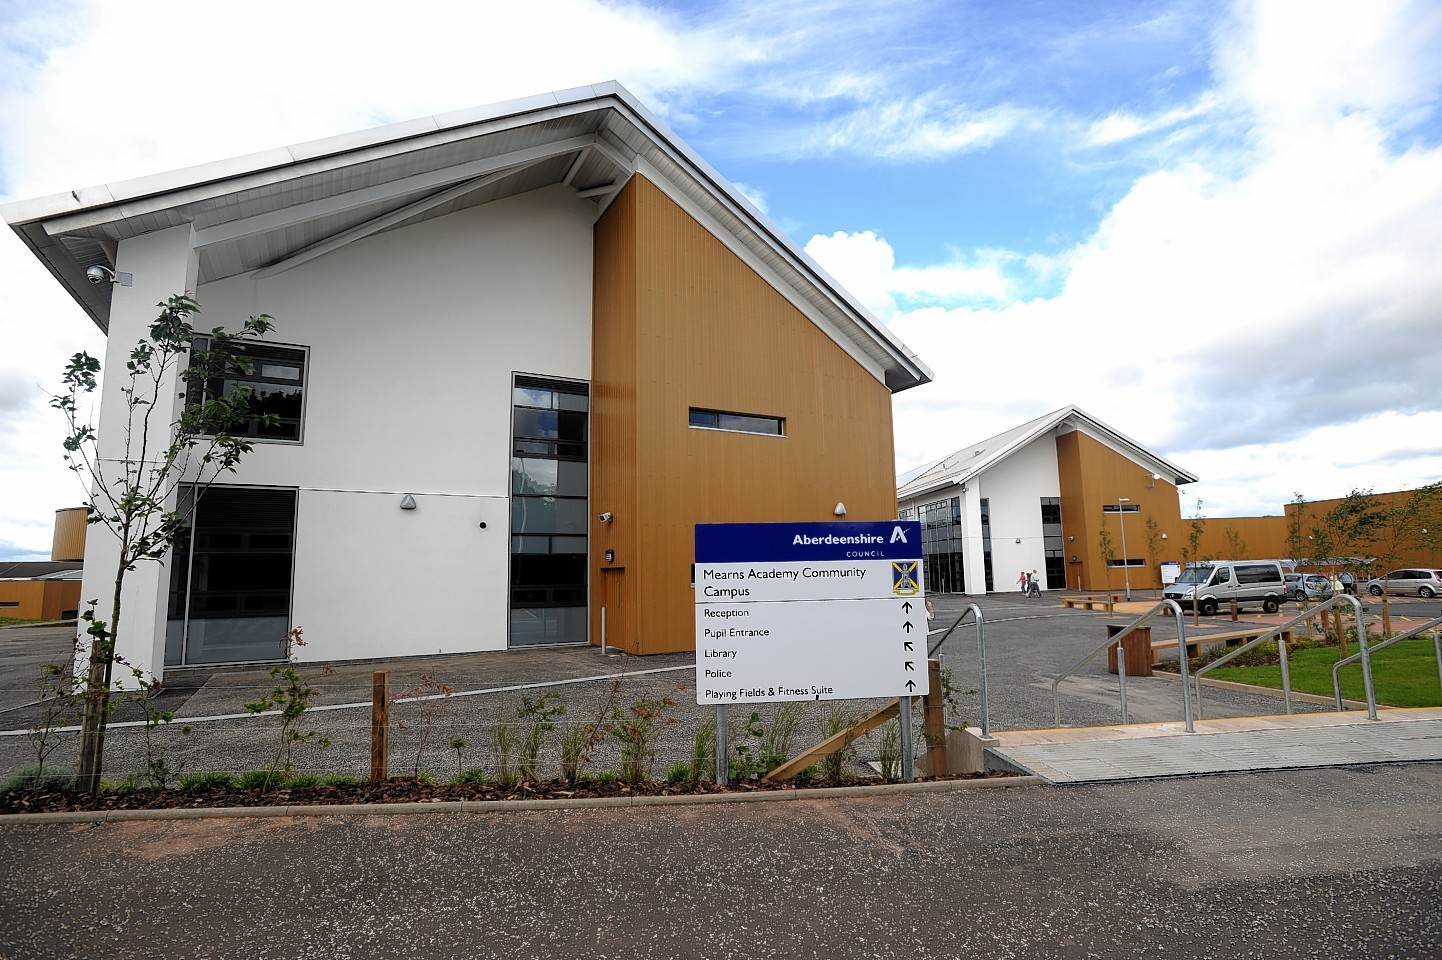 The Mearns Academy Community Campus